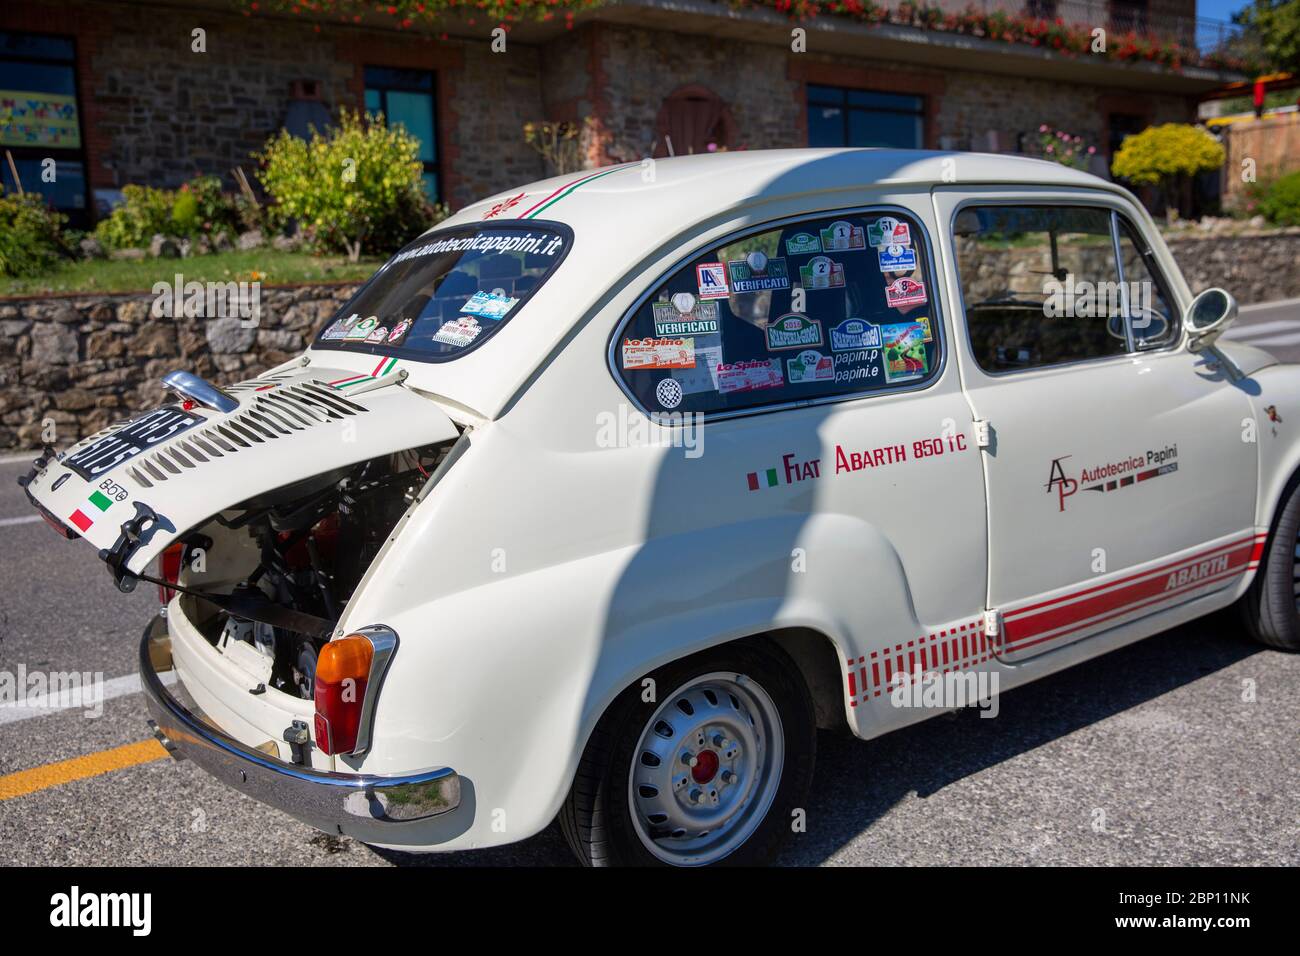 Fiat racing car in Tuscany at the Del Chianti racing hill event,Italy,Europe Stock Photo